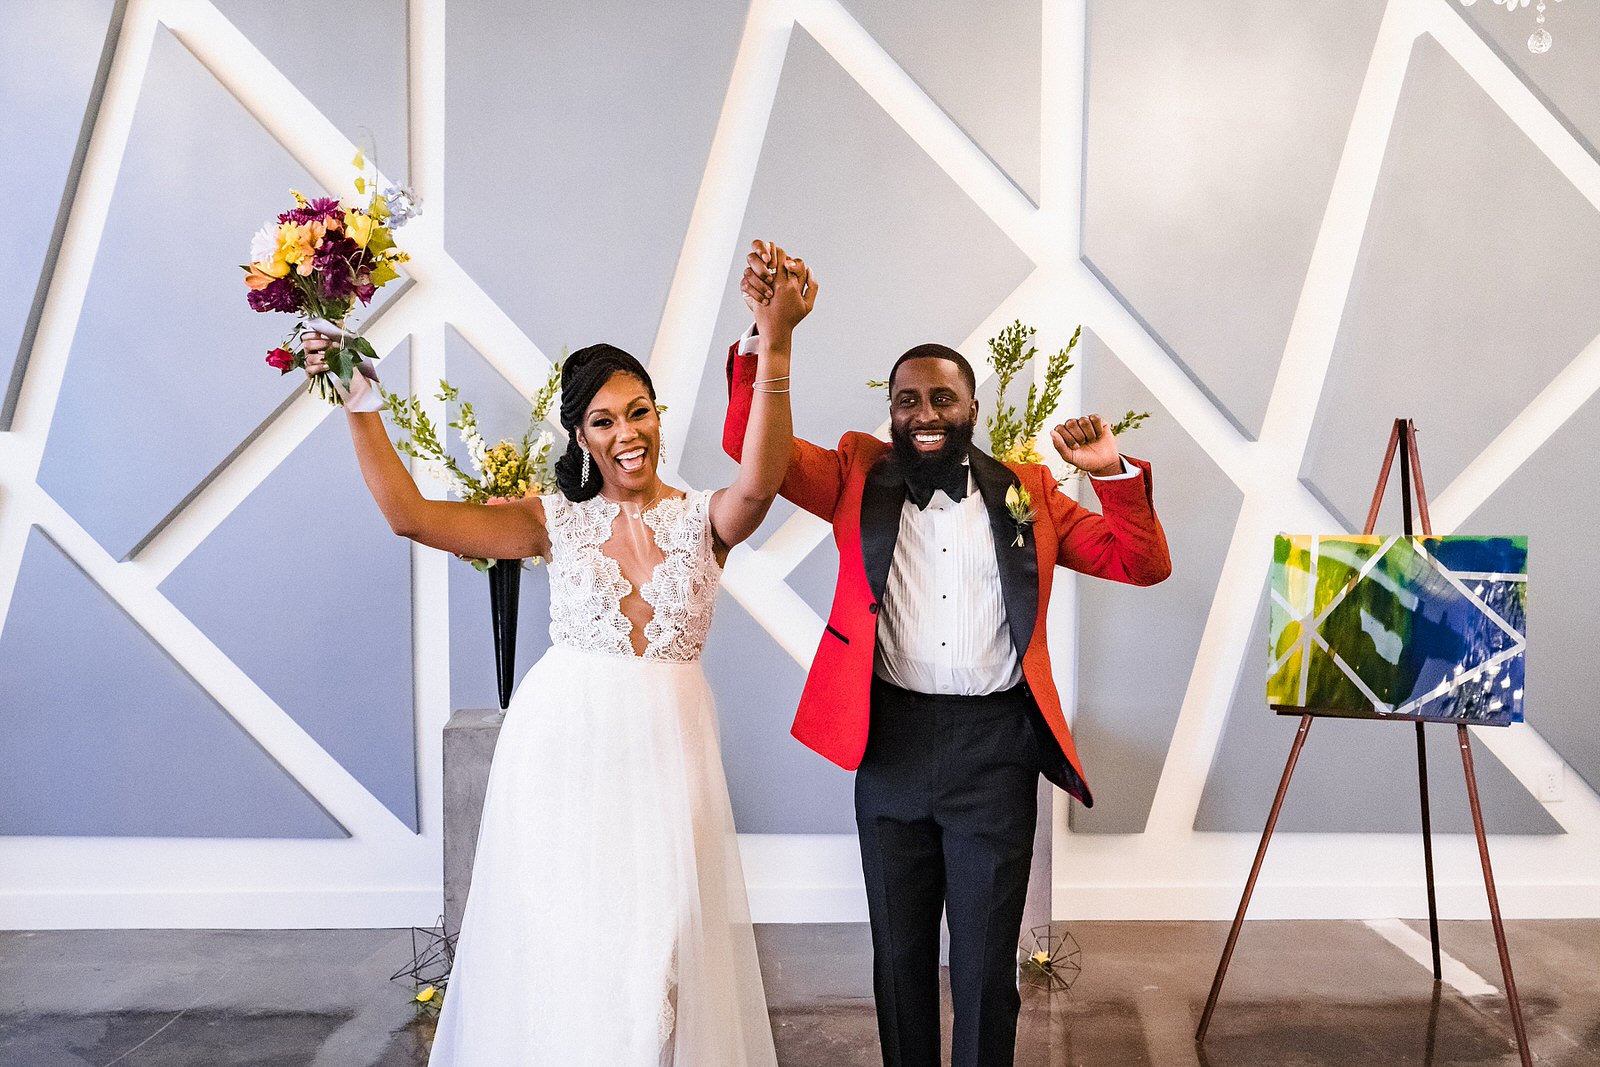 Bride and groom celebrate getting "married" at a colorful wedding inspiration styled shoot